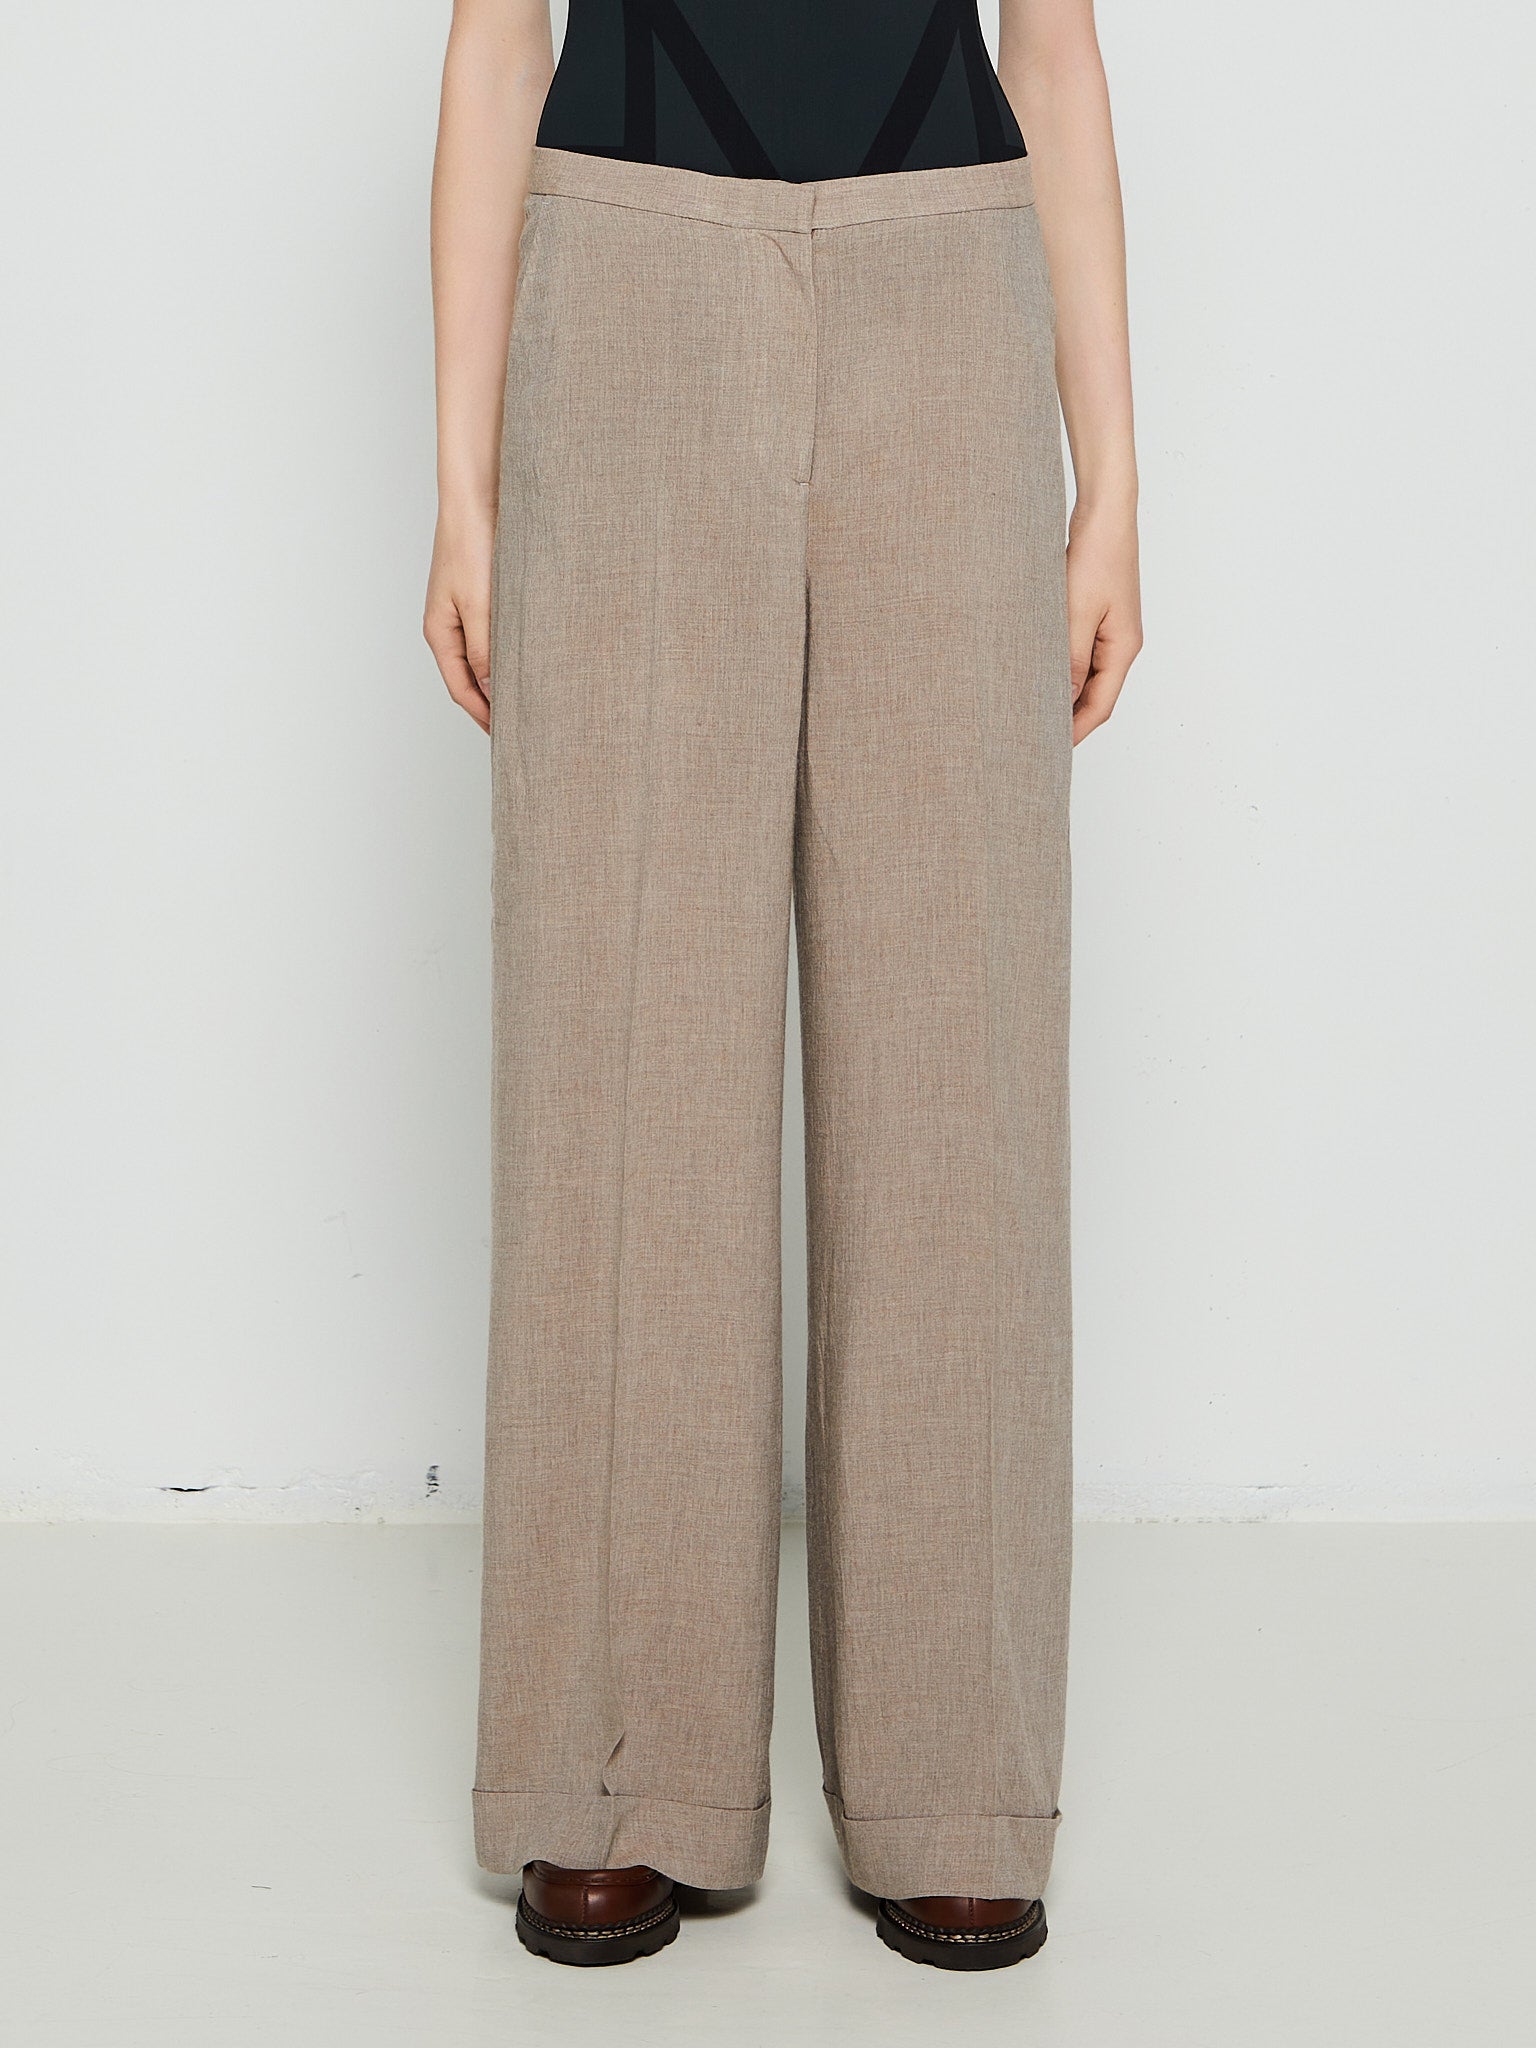 TOTEME - Wide Fluid Trousers in Light Brown Mélange